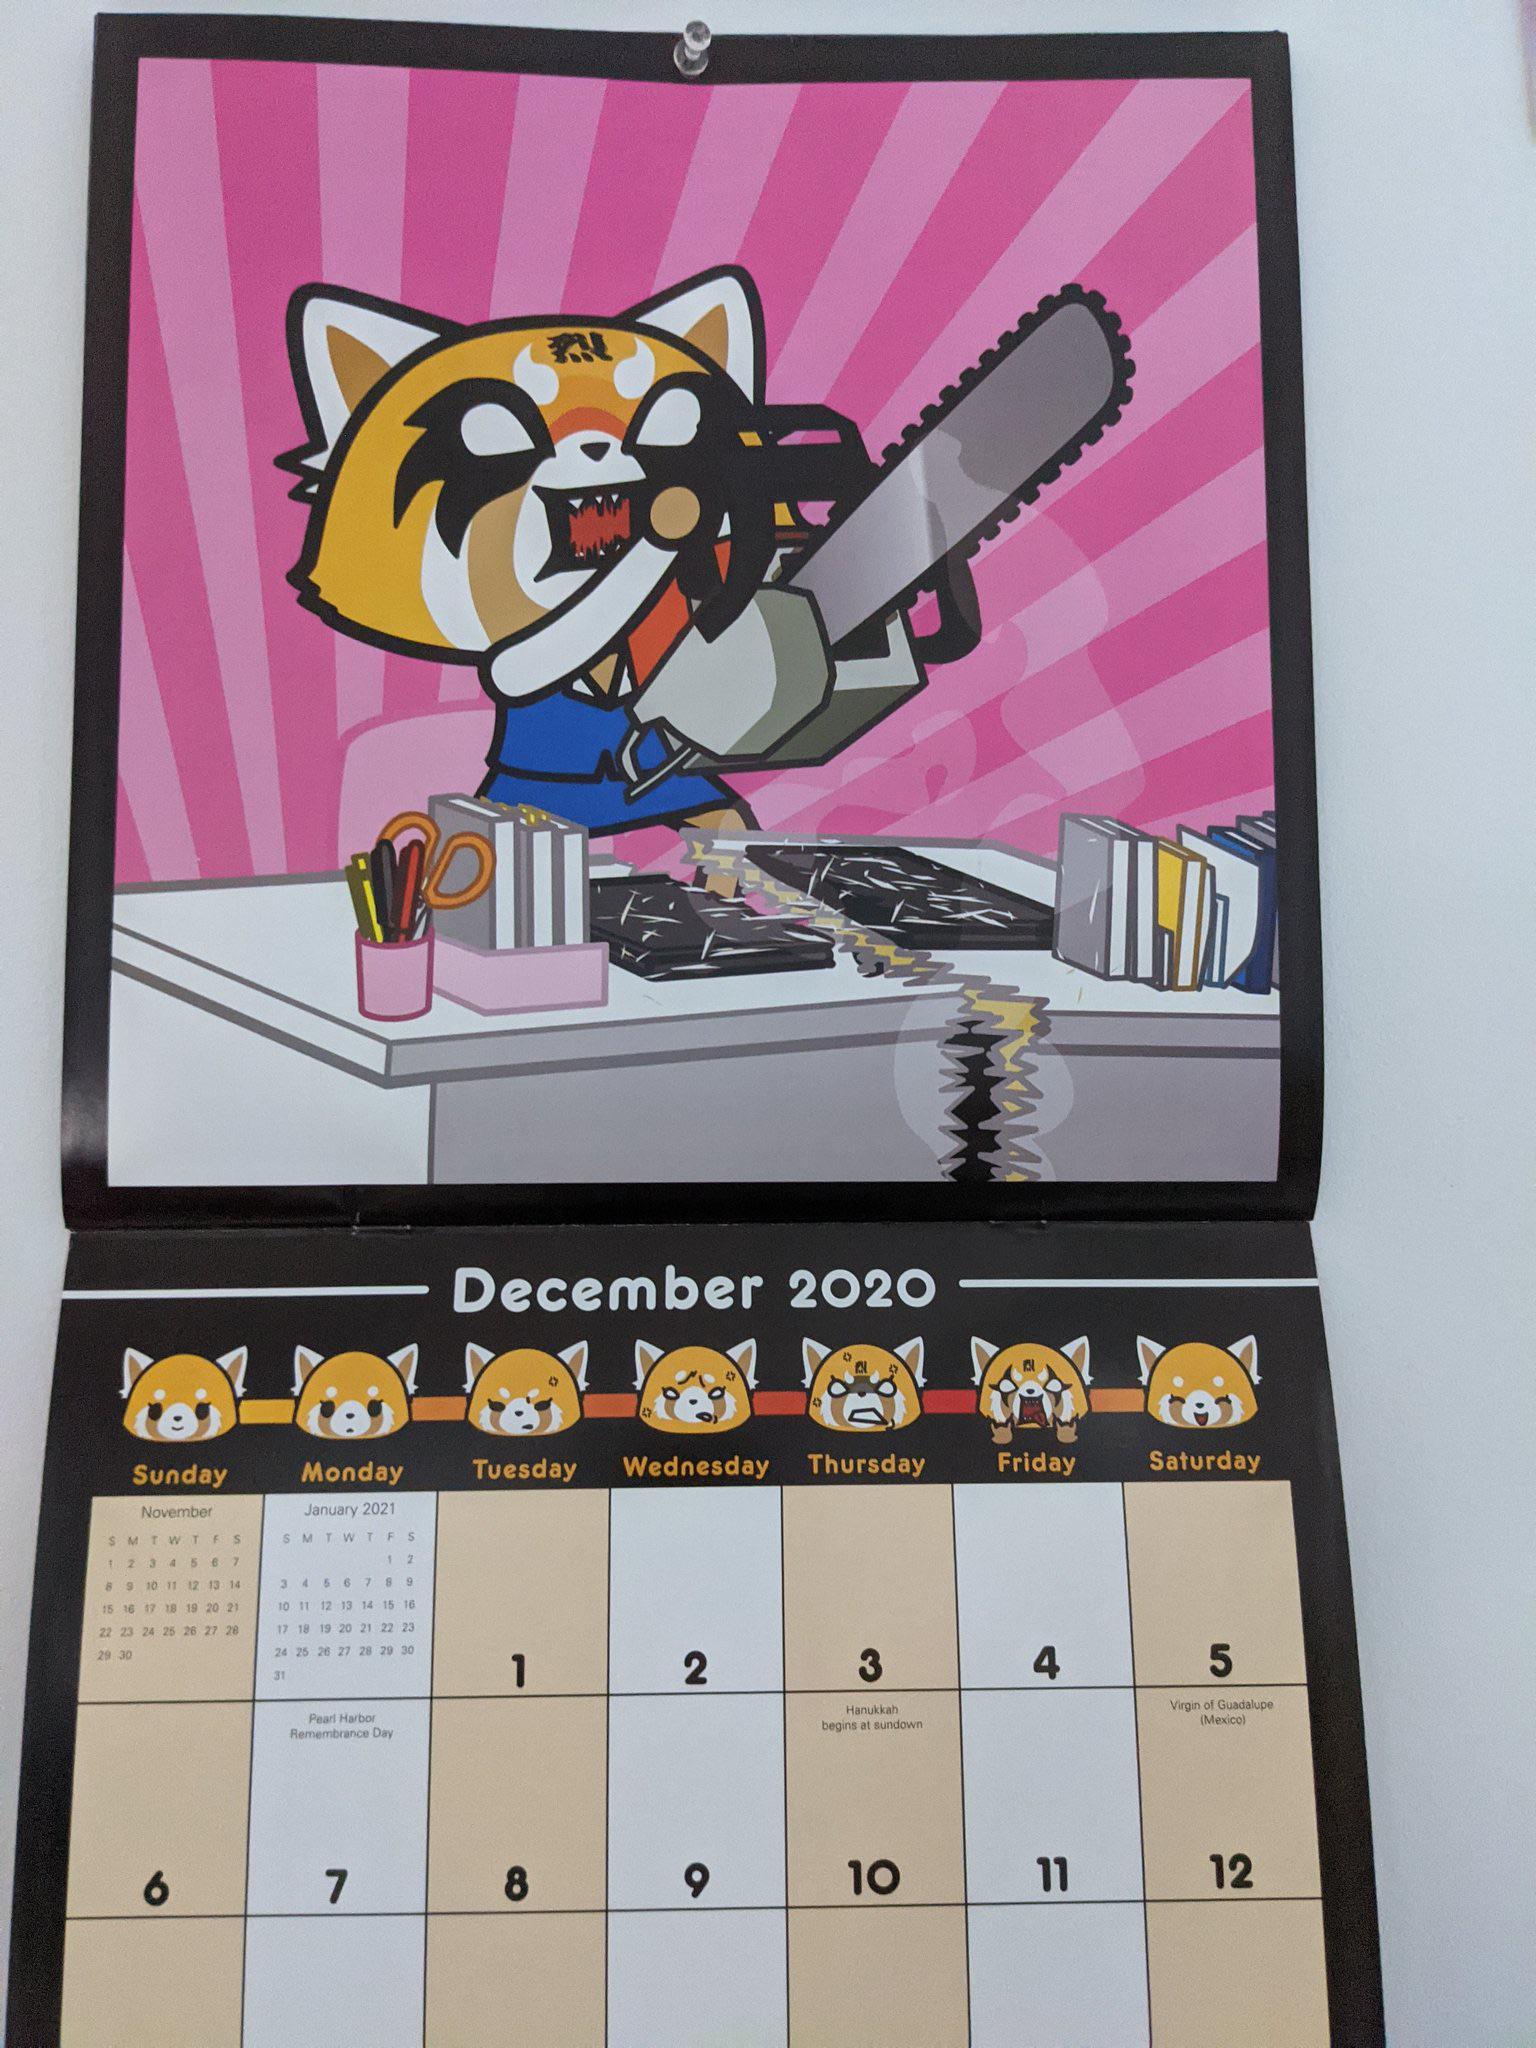 The December Aggretsuko calendar is truly the embodiment of the end of